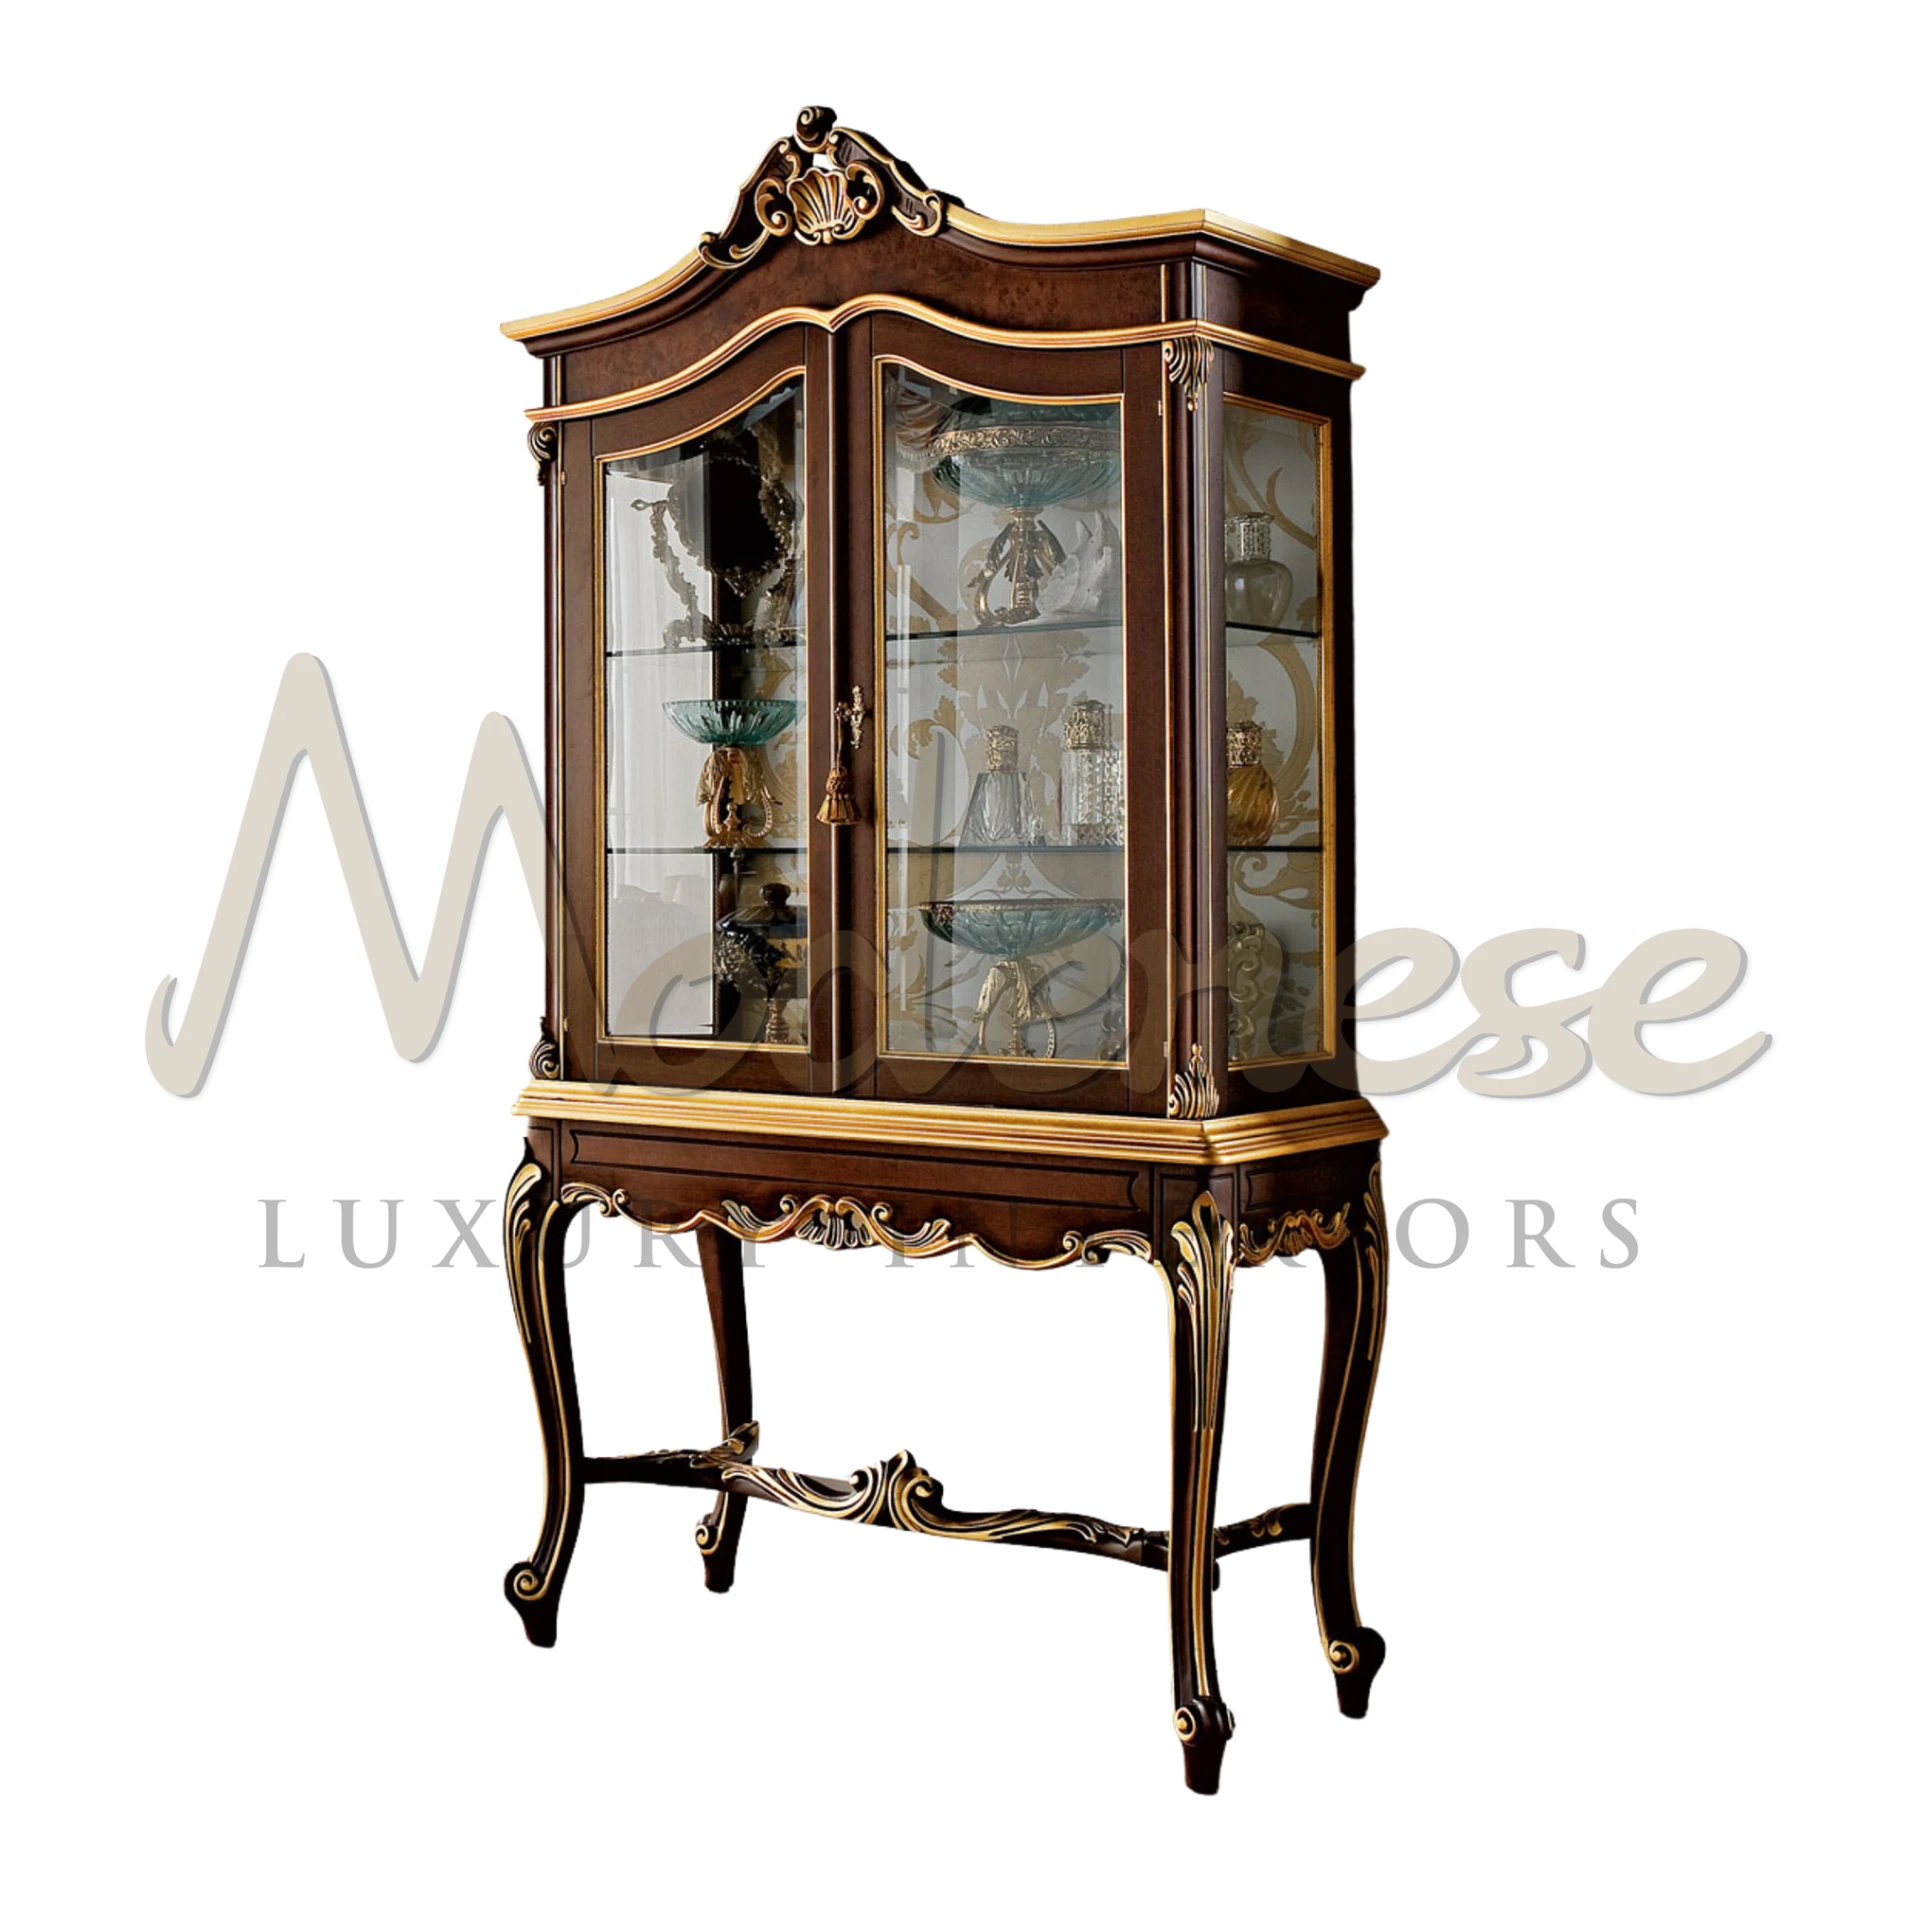 Classic Imperial Showcase Secretaire with glass doors and twisted designs